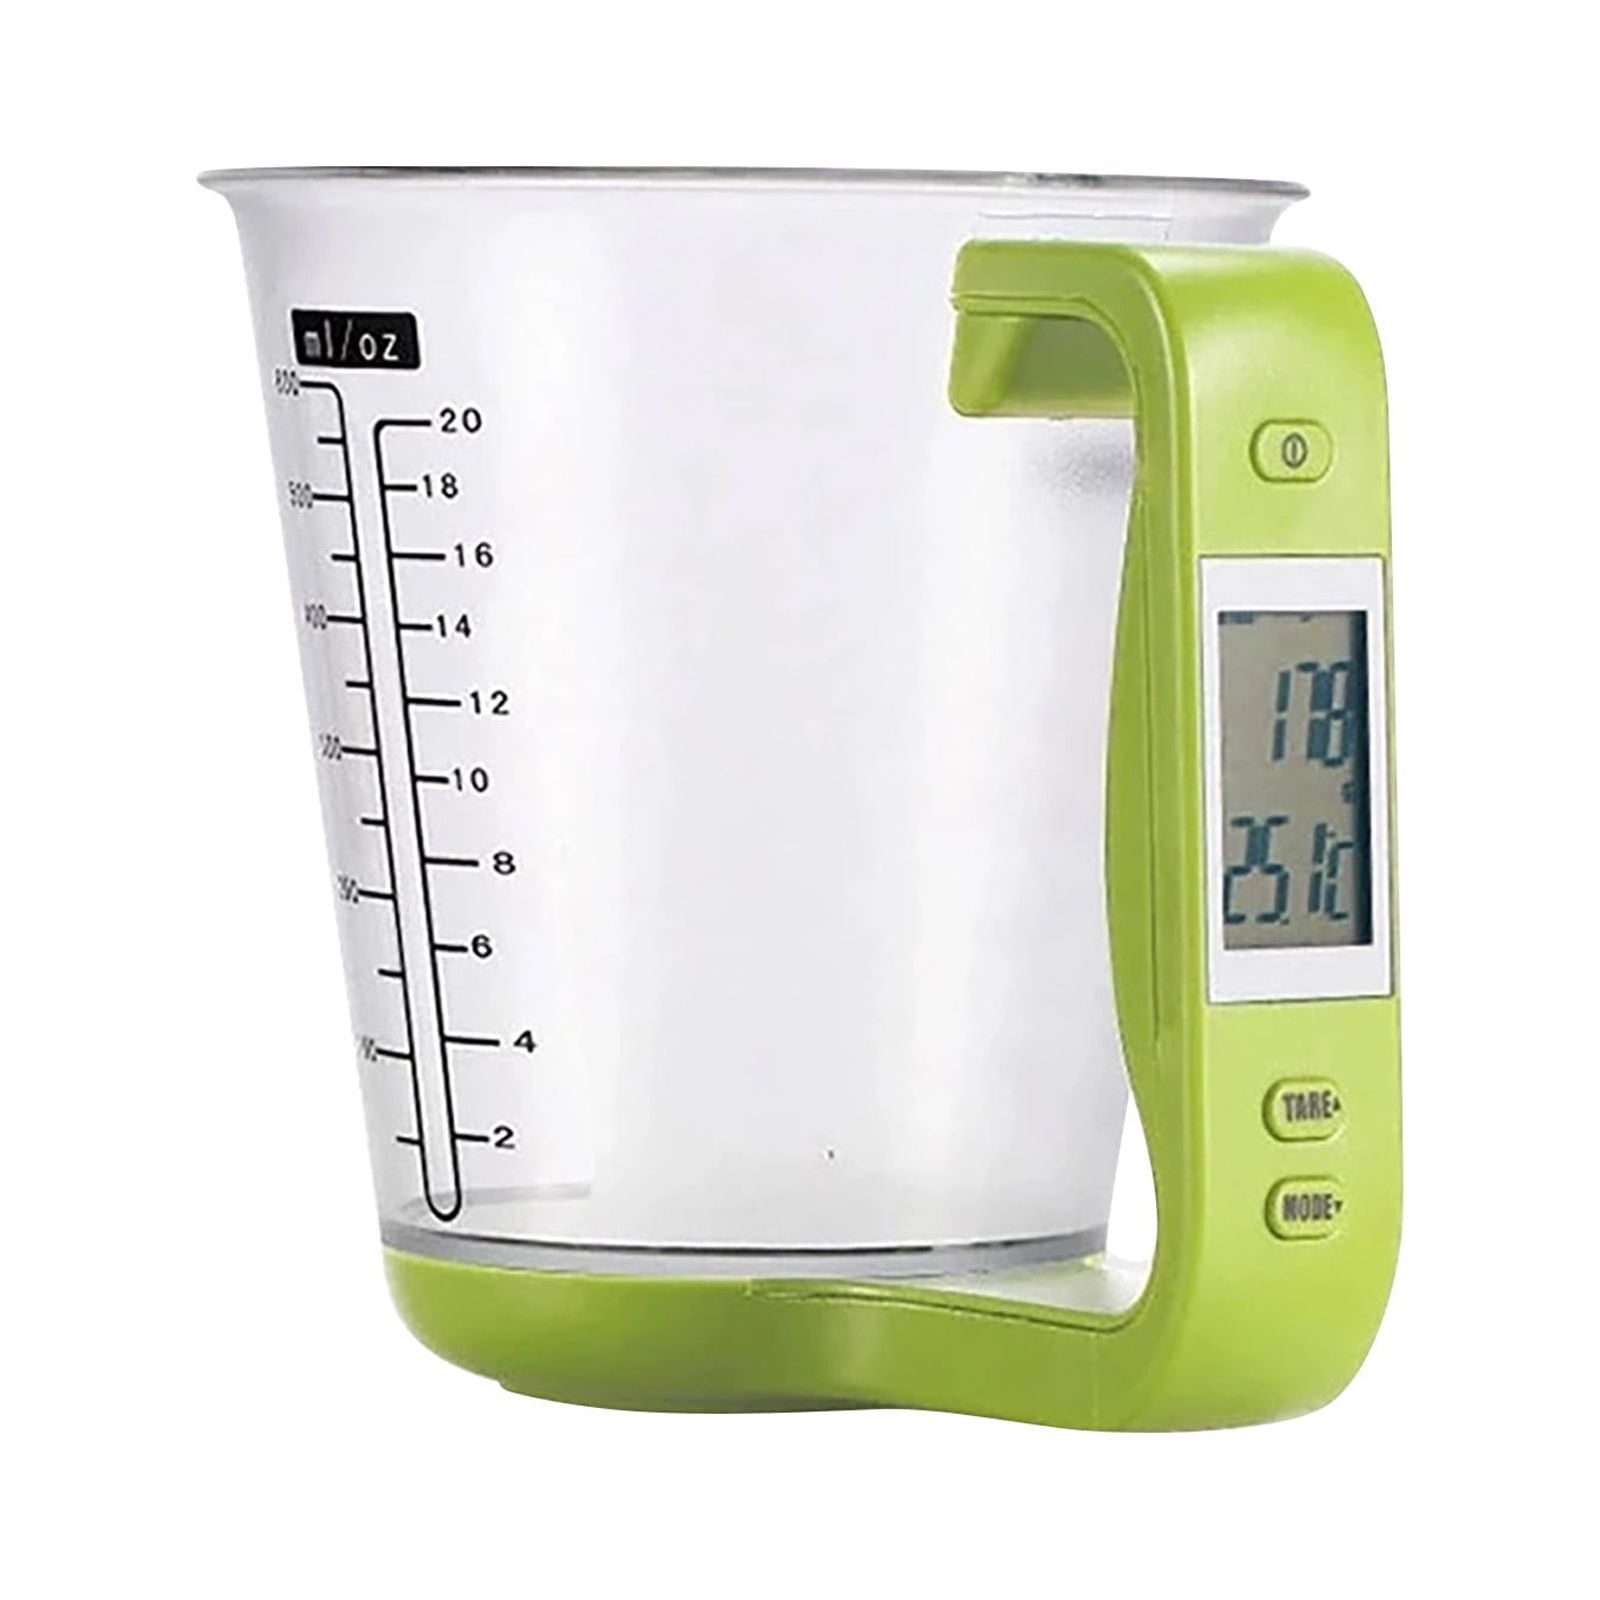 OAVQHLG3B Kitchen Scale Digital Measuring Cup Food Scale,Weight Scale  Scales Weighing Water Milk Flour Sugar Oil Coffee Liquid Baking Cooking  Plastic Measuring Cups Grams and Ounces 